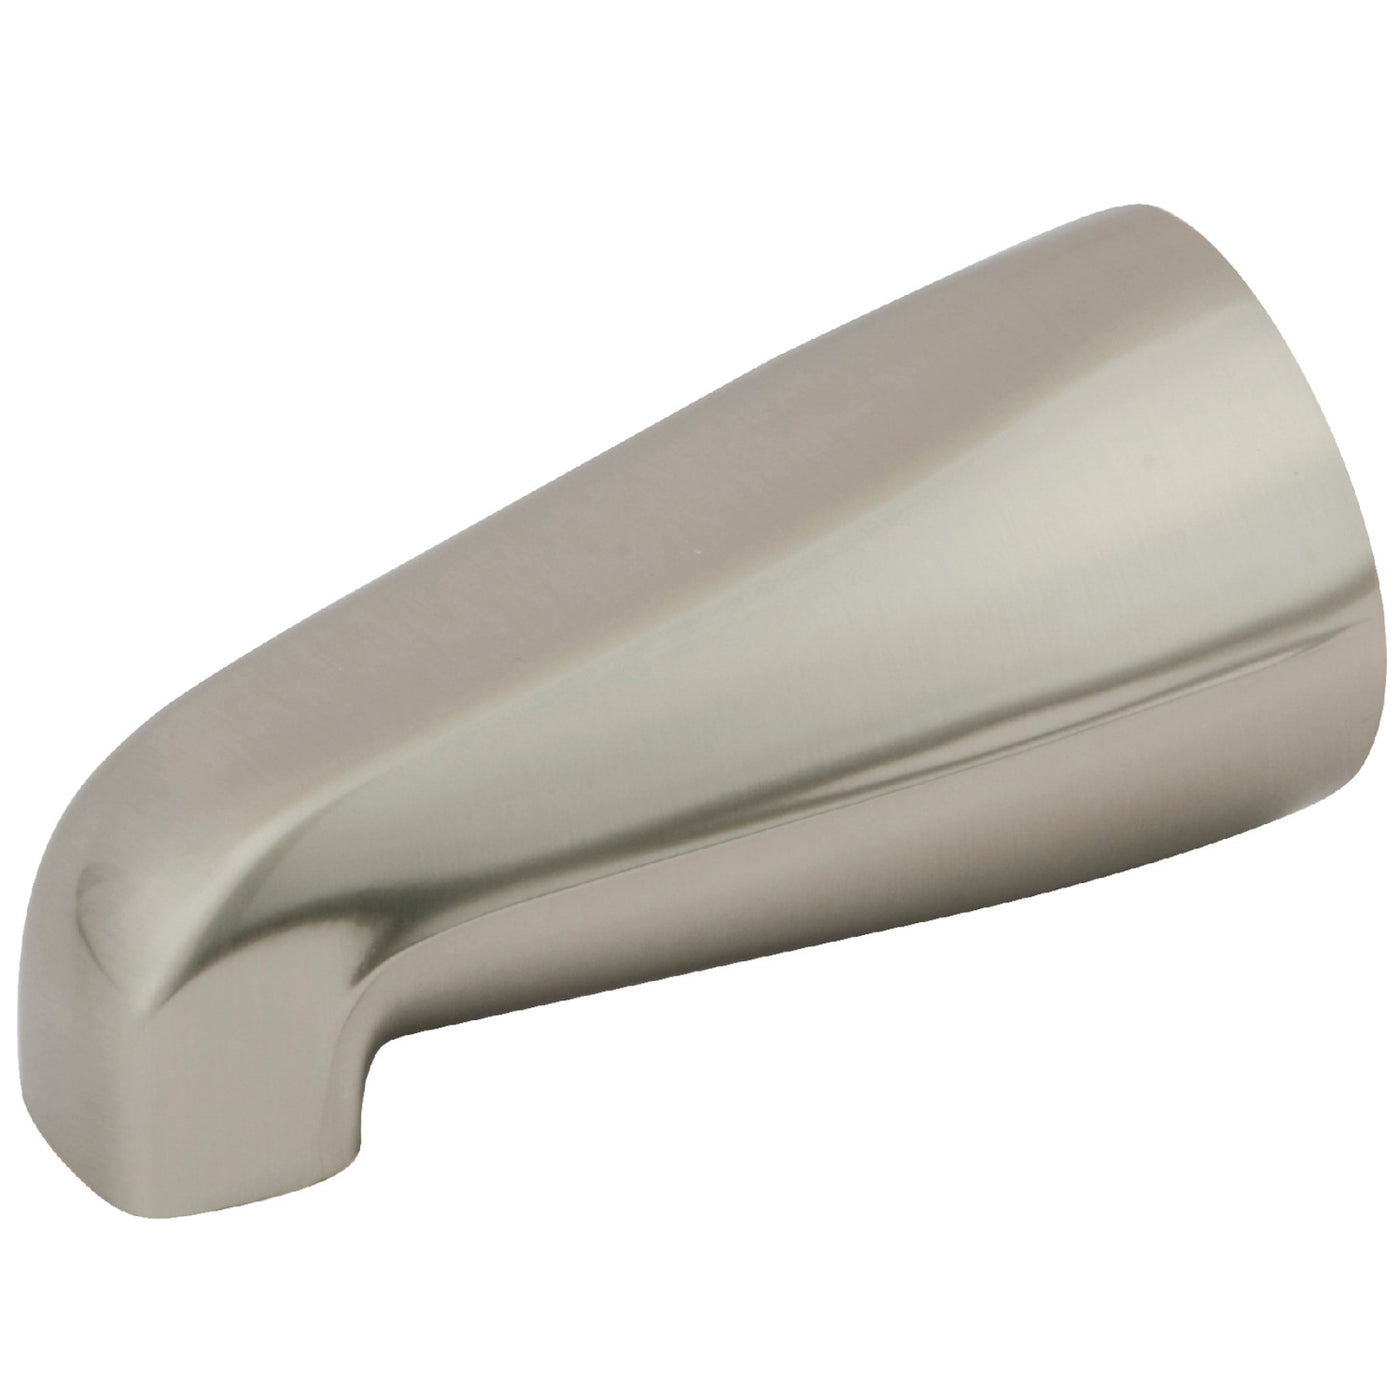 Elements of Design DK187A8 5-1/4 Inch Tub Spout, Brushed Nickel